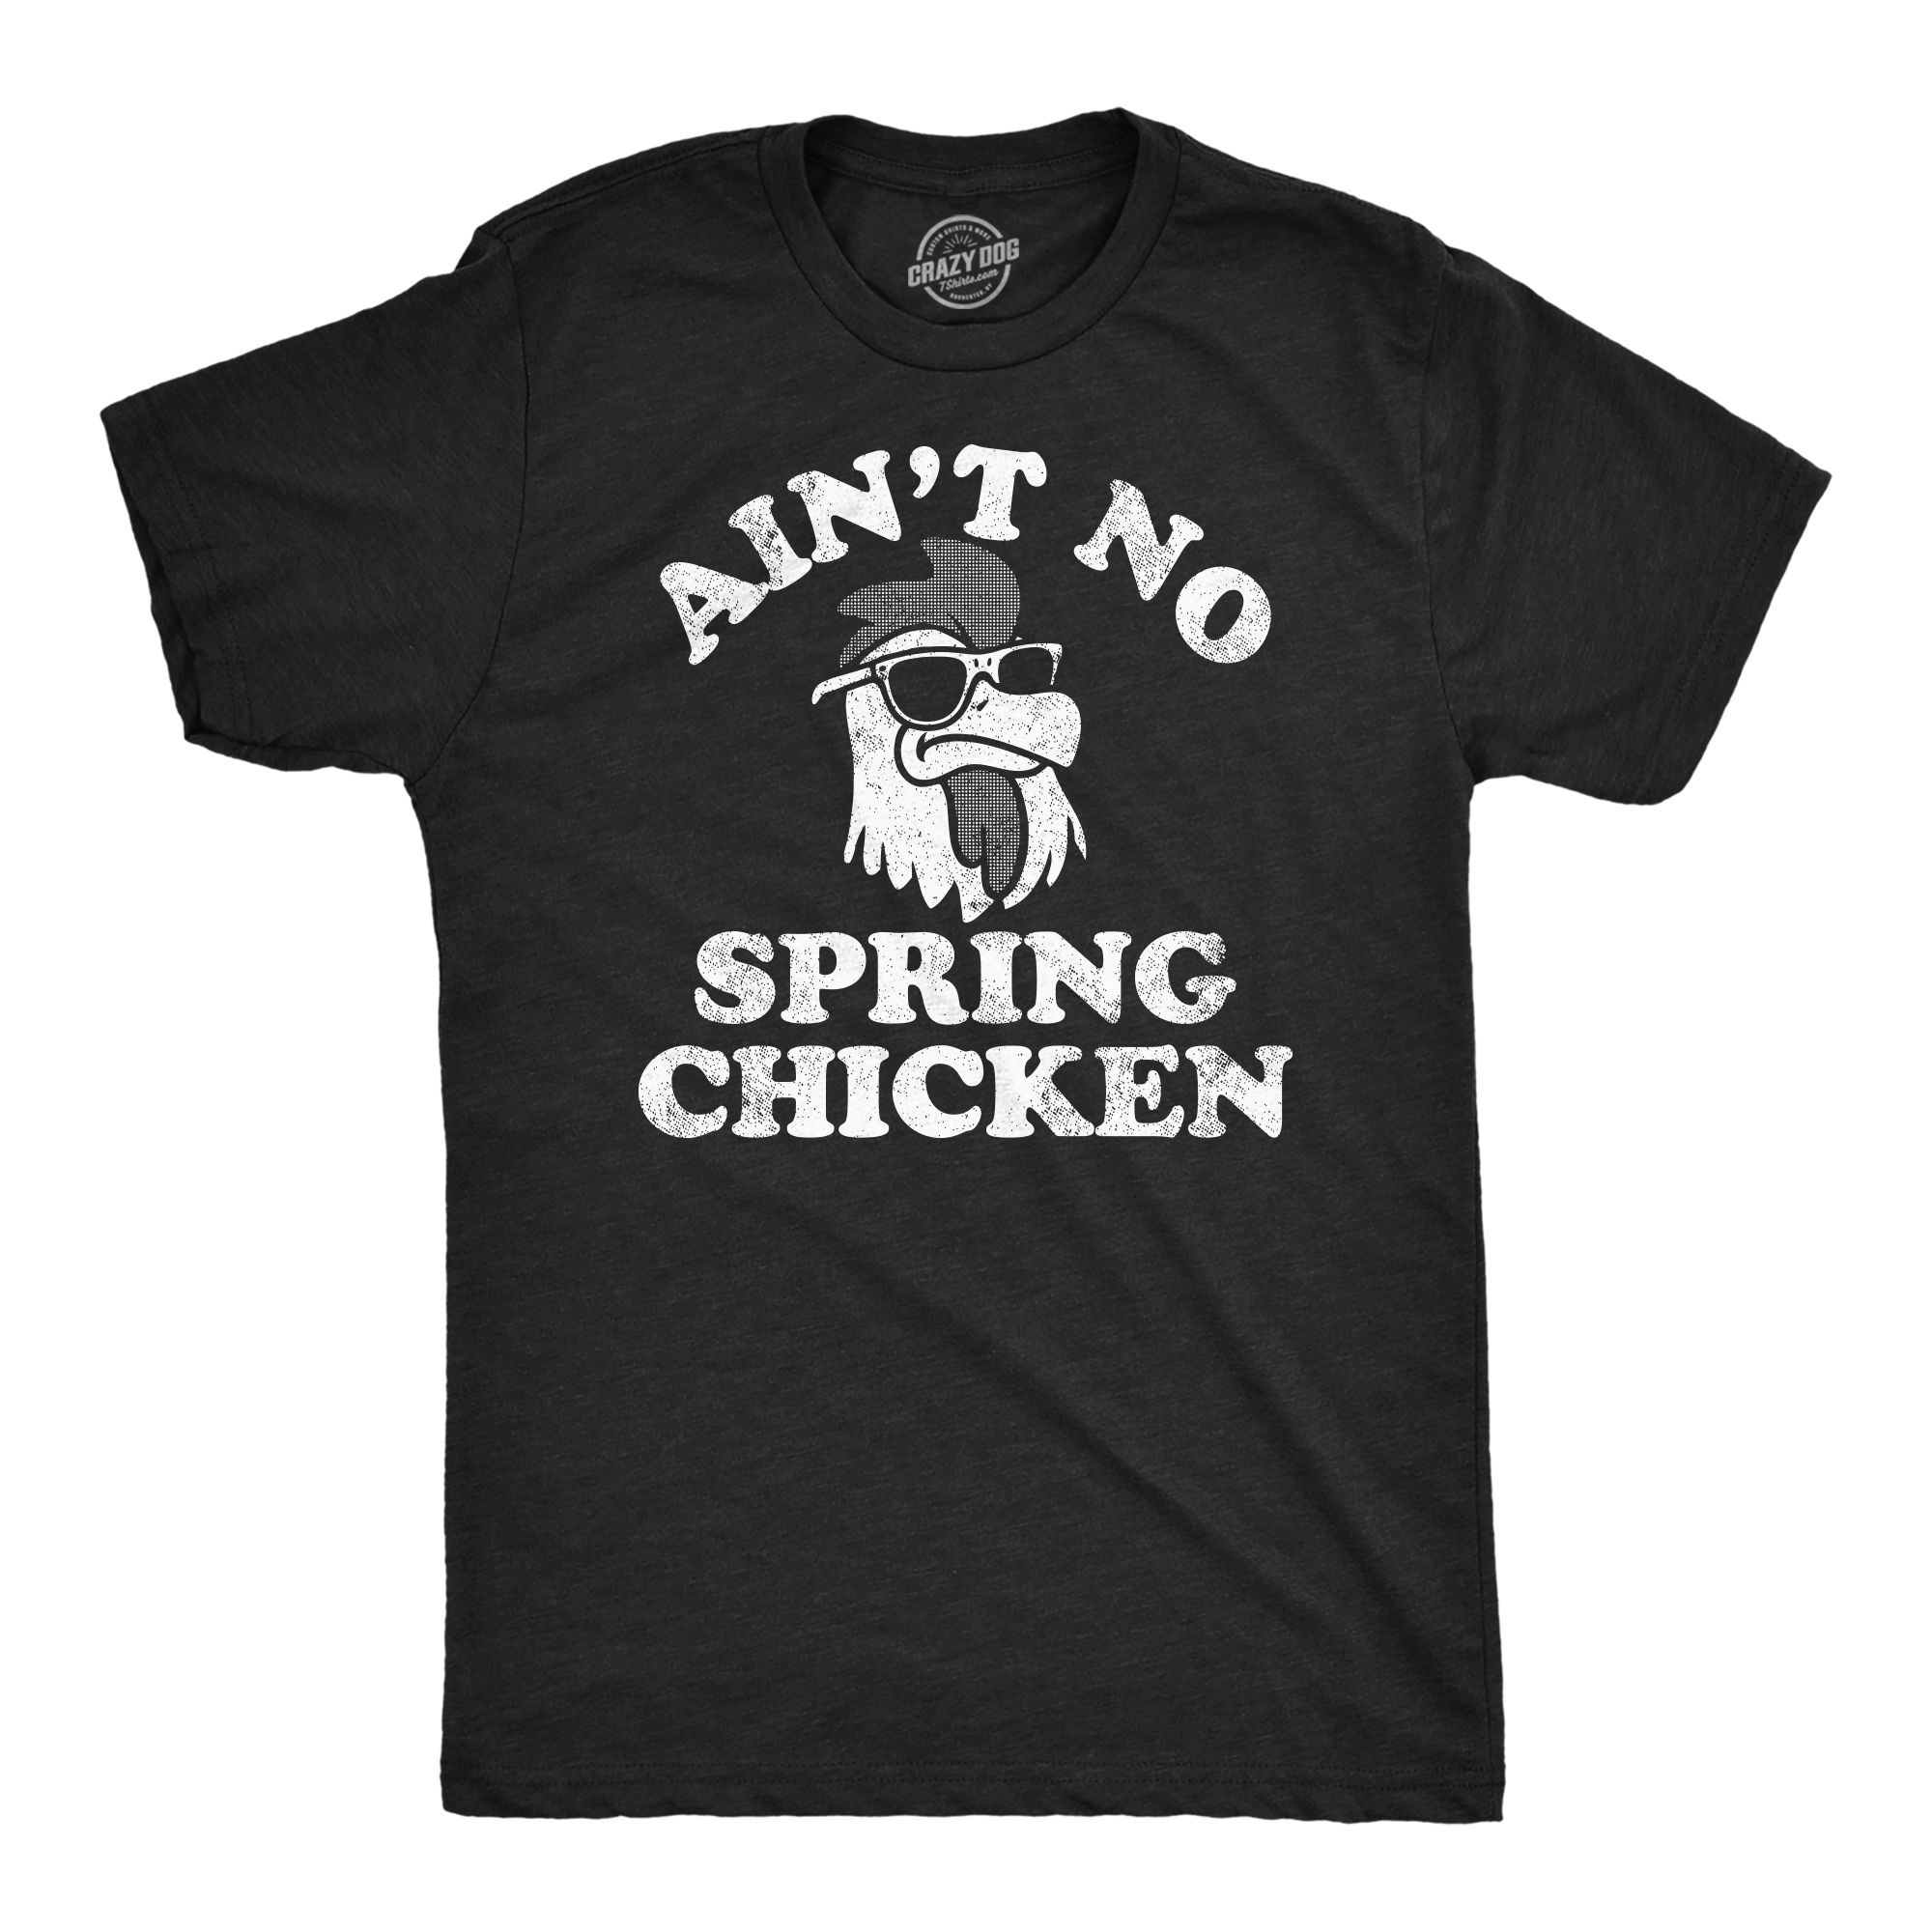 Funny Heather Black - Aint No Spring Chicken Aint No Spring Chicken Mens T Shirt Nerdy sarcastic animal Tee